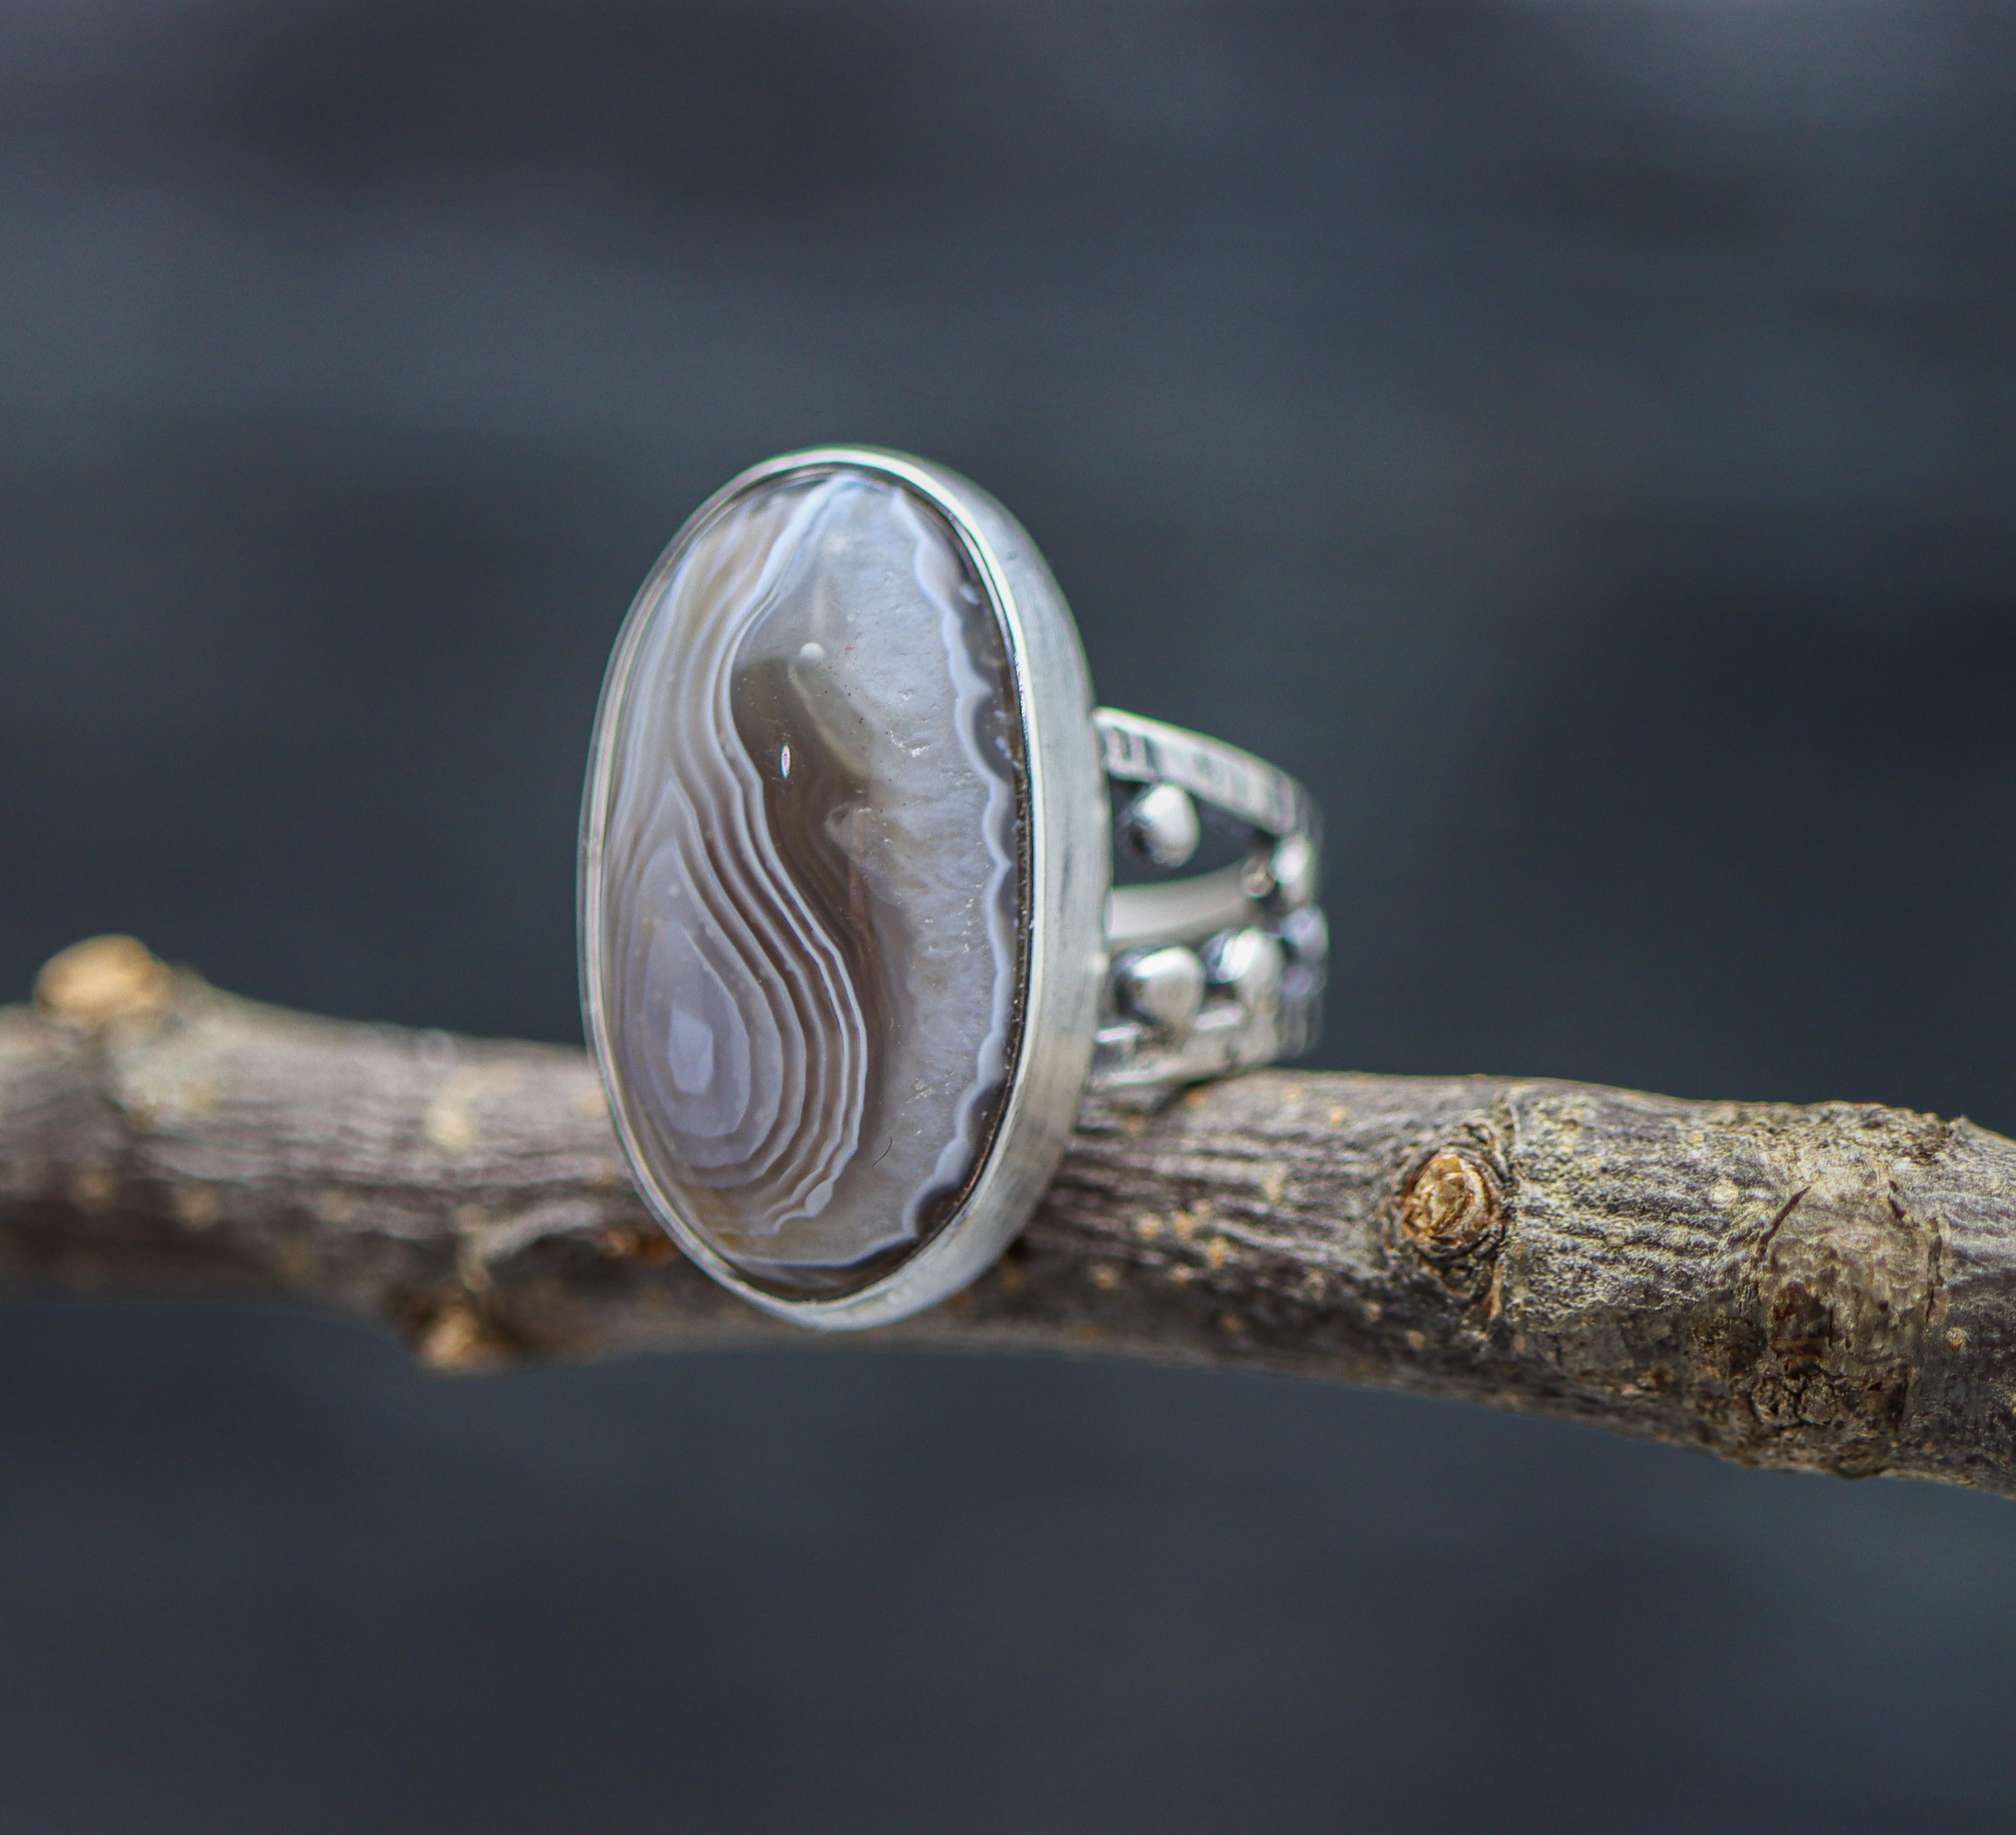 *ON SALE* Botswana Agate Sterling Silver Bubble Band Ring Size 6